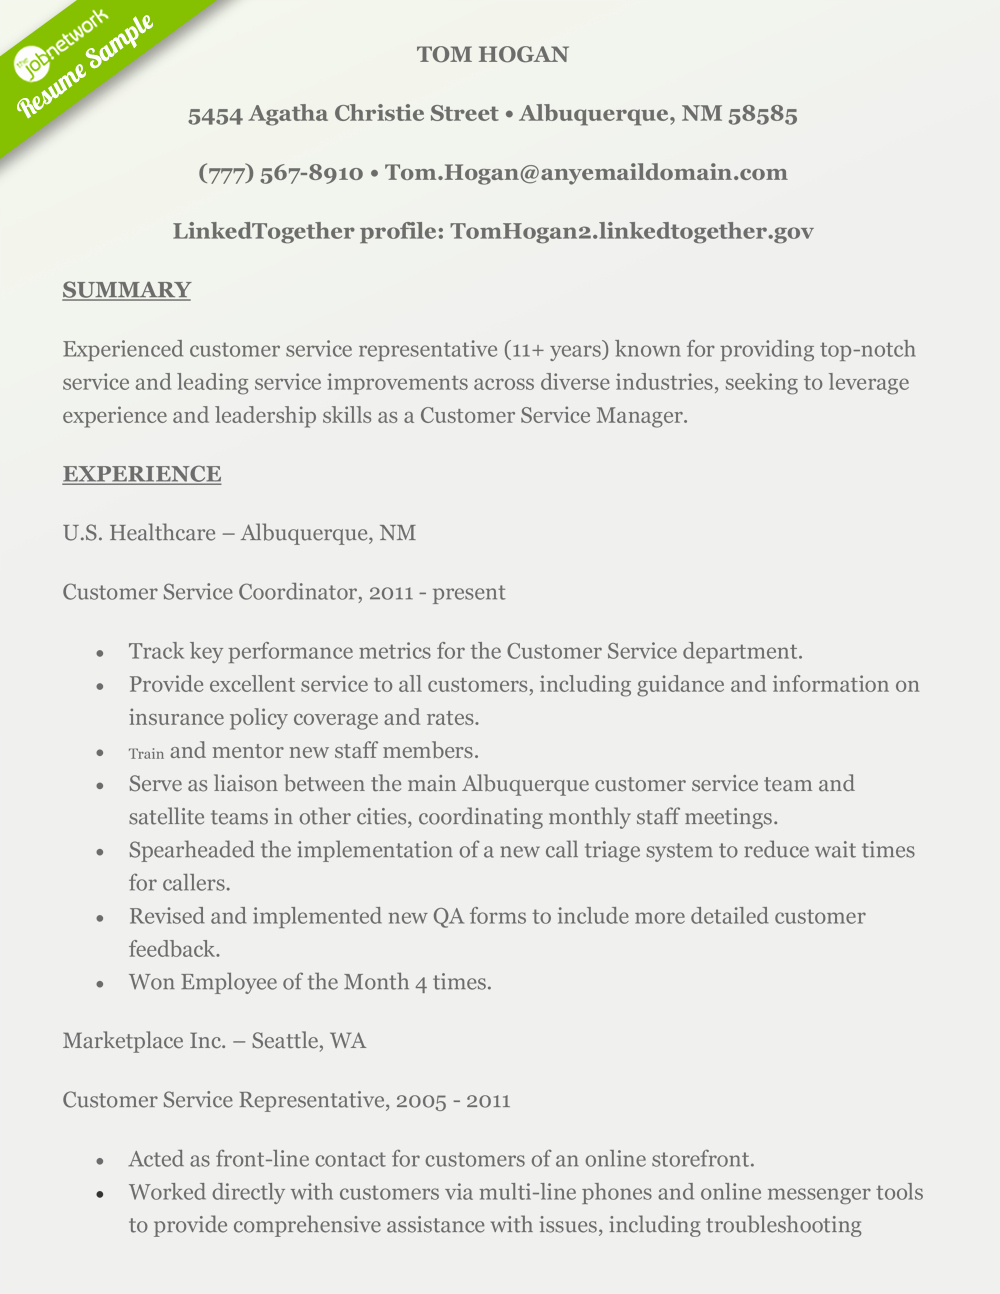 How to Craft A Perfect Customer Service Resume Using Examples